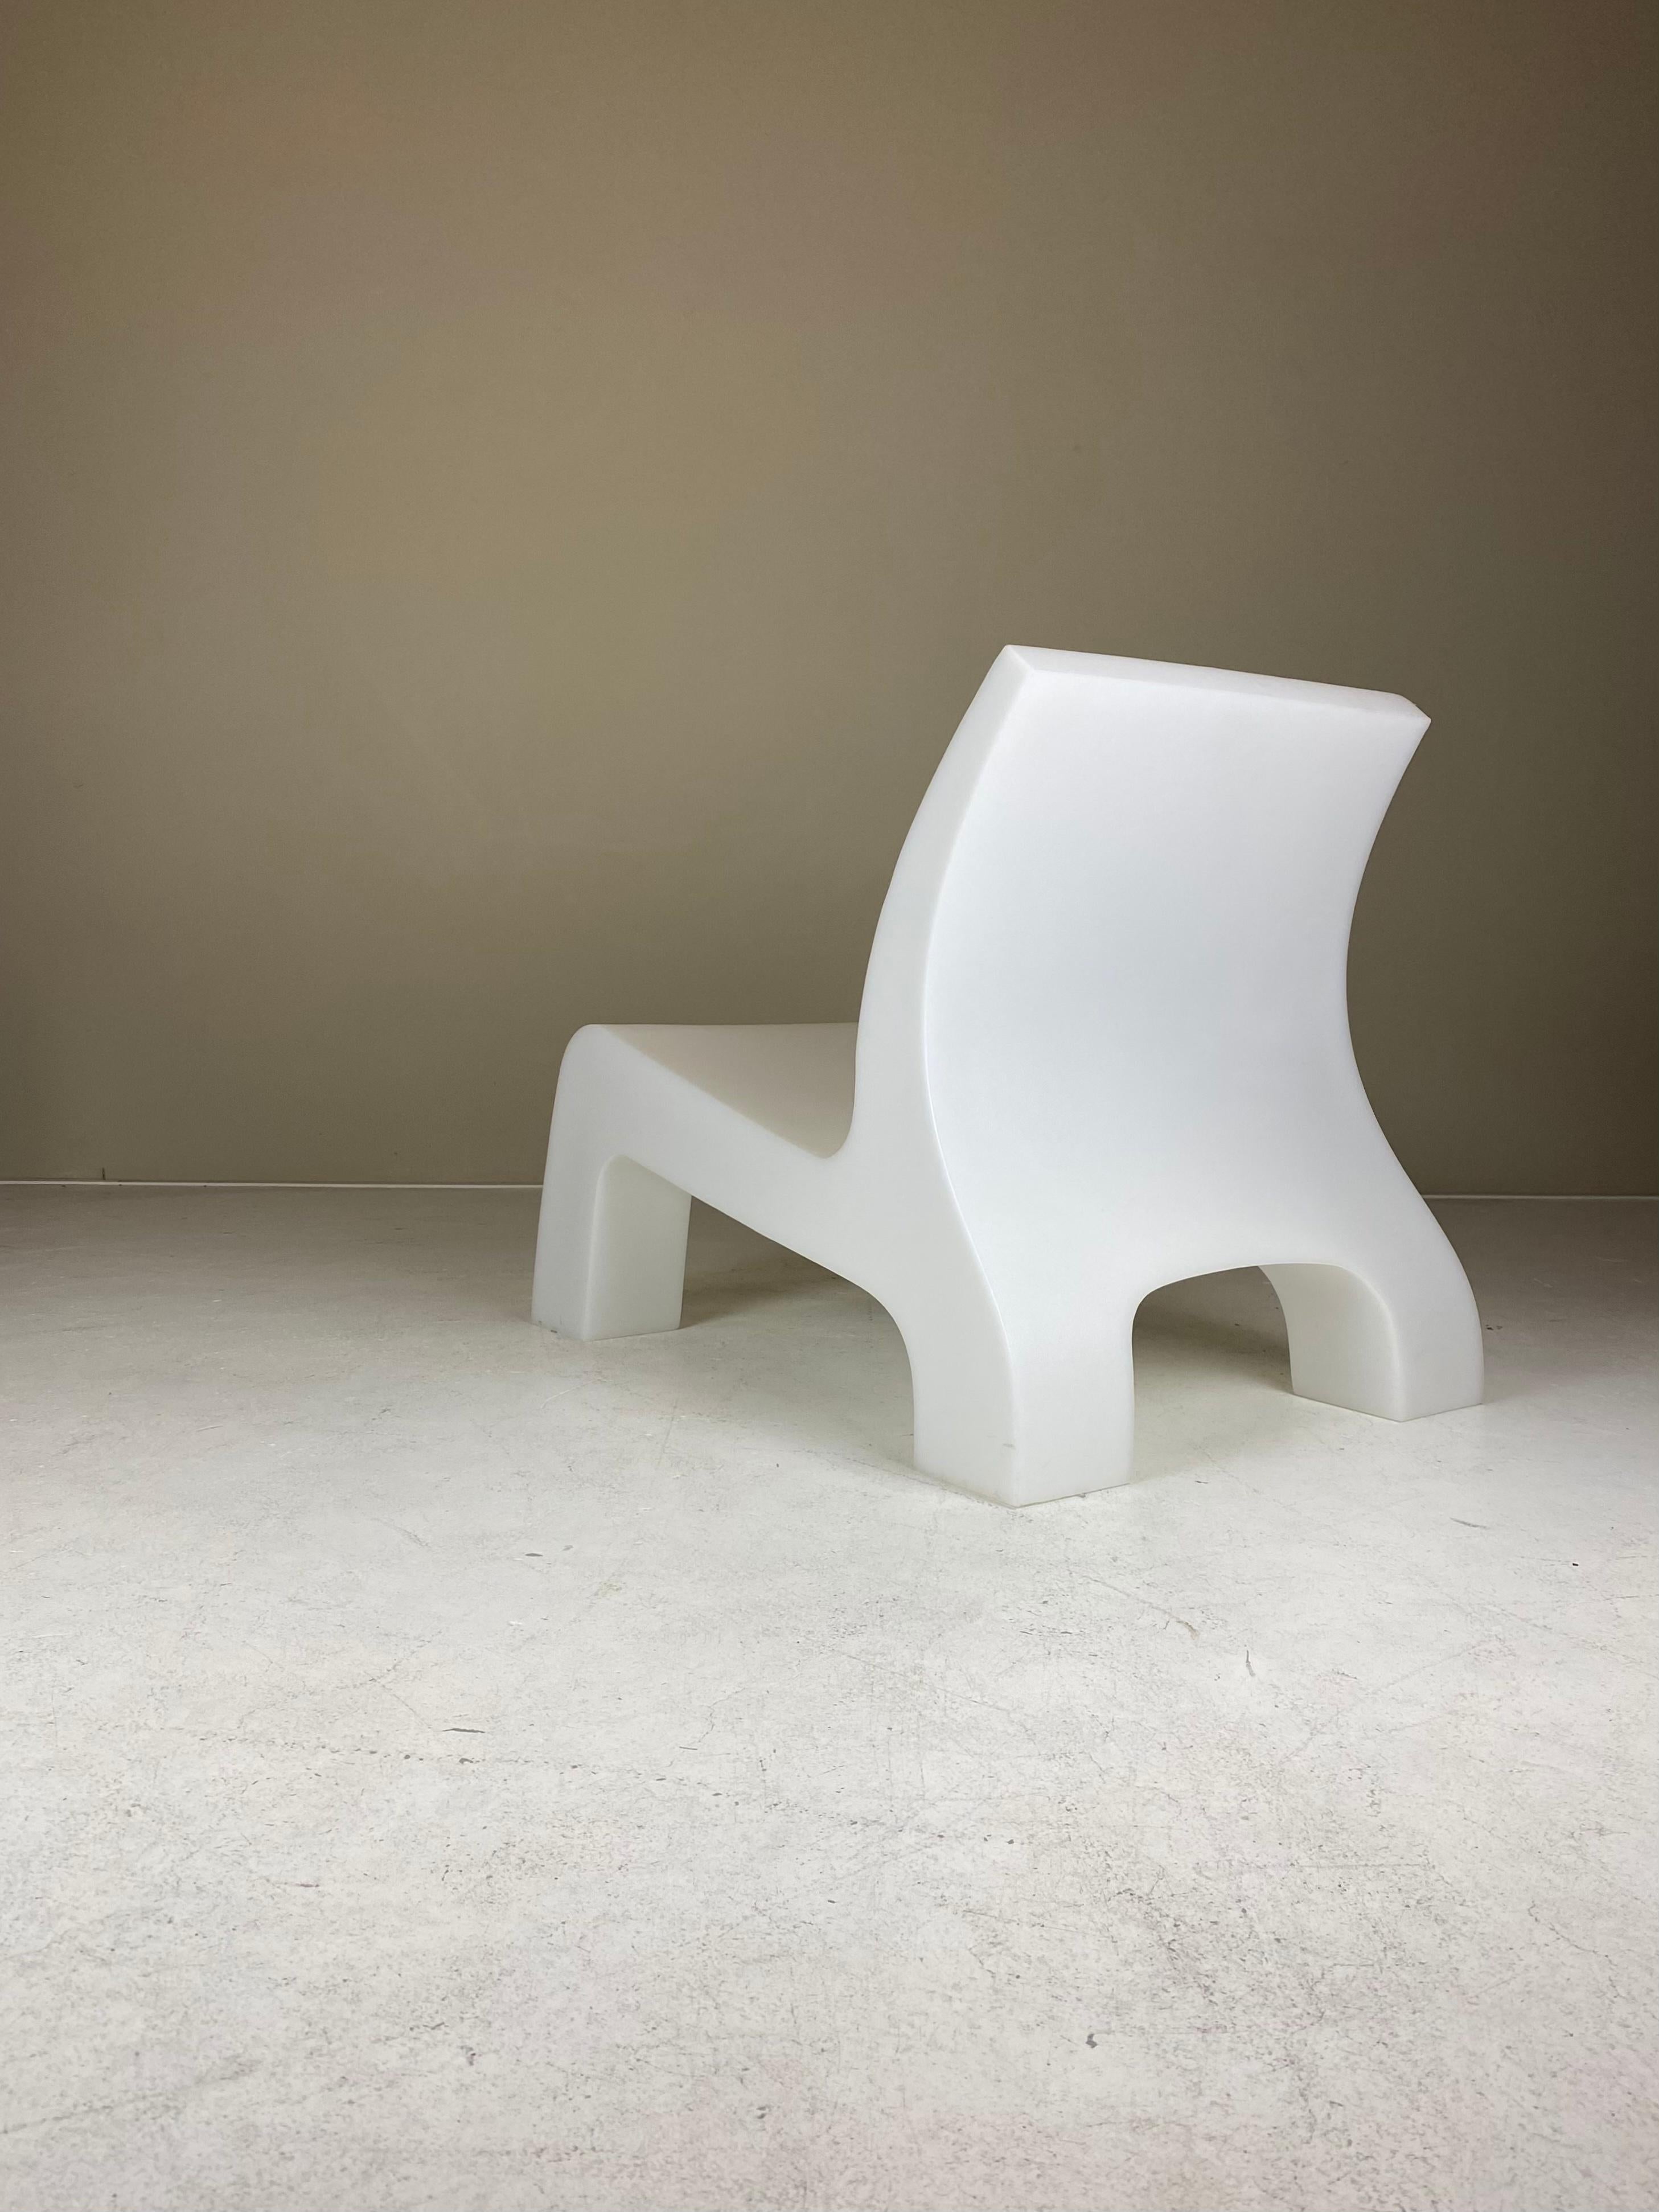 In the early 2000s, Richard Hutten aimed to design a piece of furniture which was not constructed. In his research he ended up with rotation moulding, for which he made his own rotation moulding machine. The featured Rhino Chair was one of his first